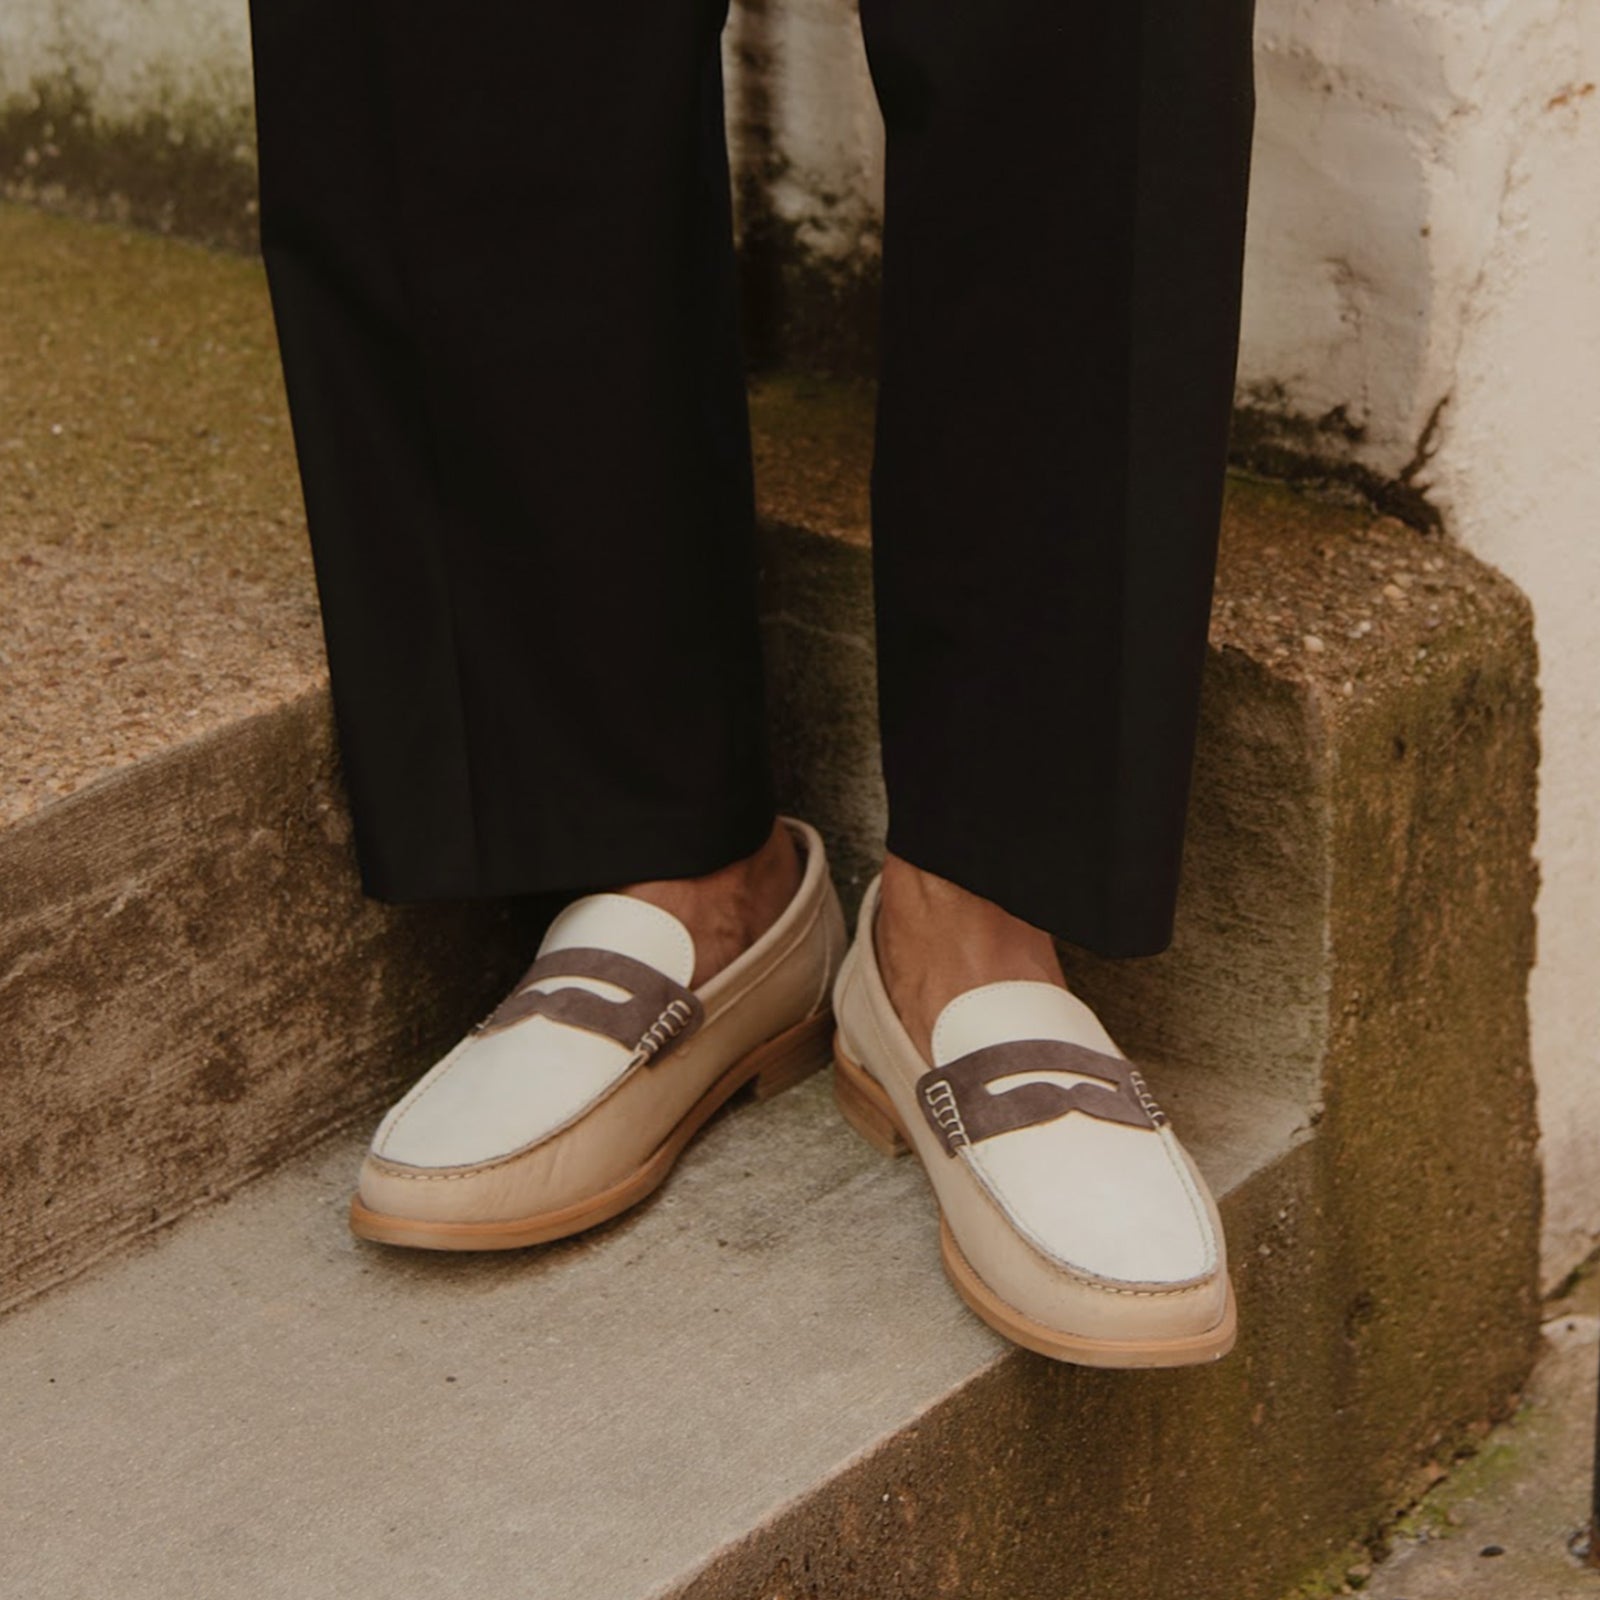 Greats The Essex Penny Loafer